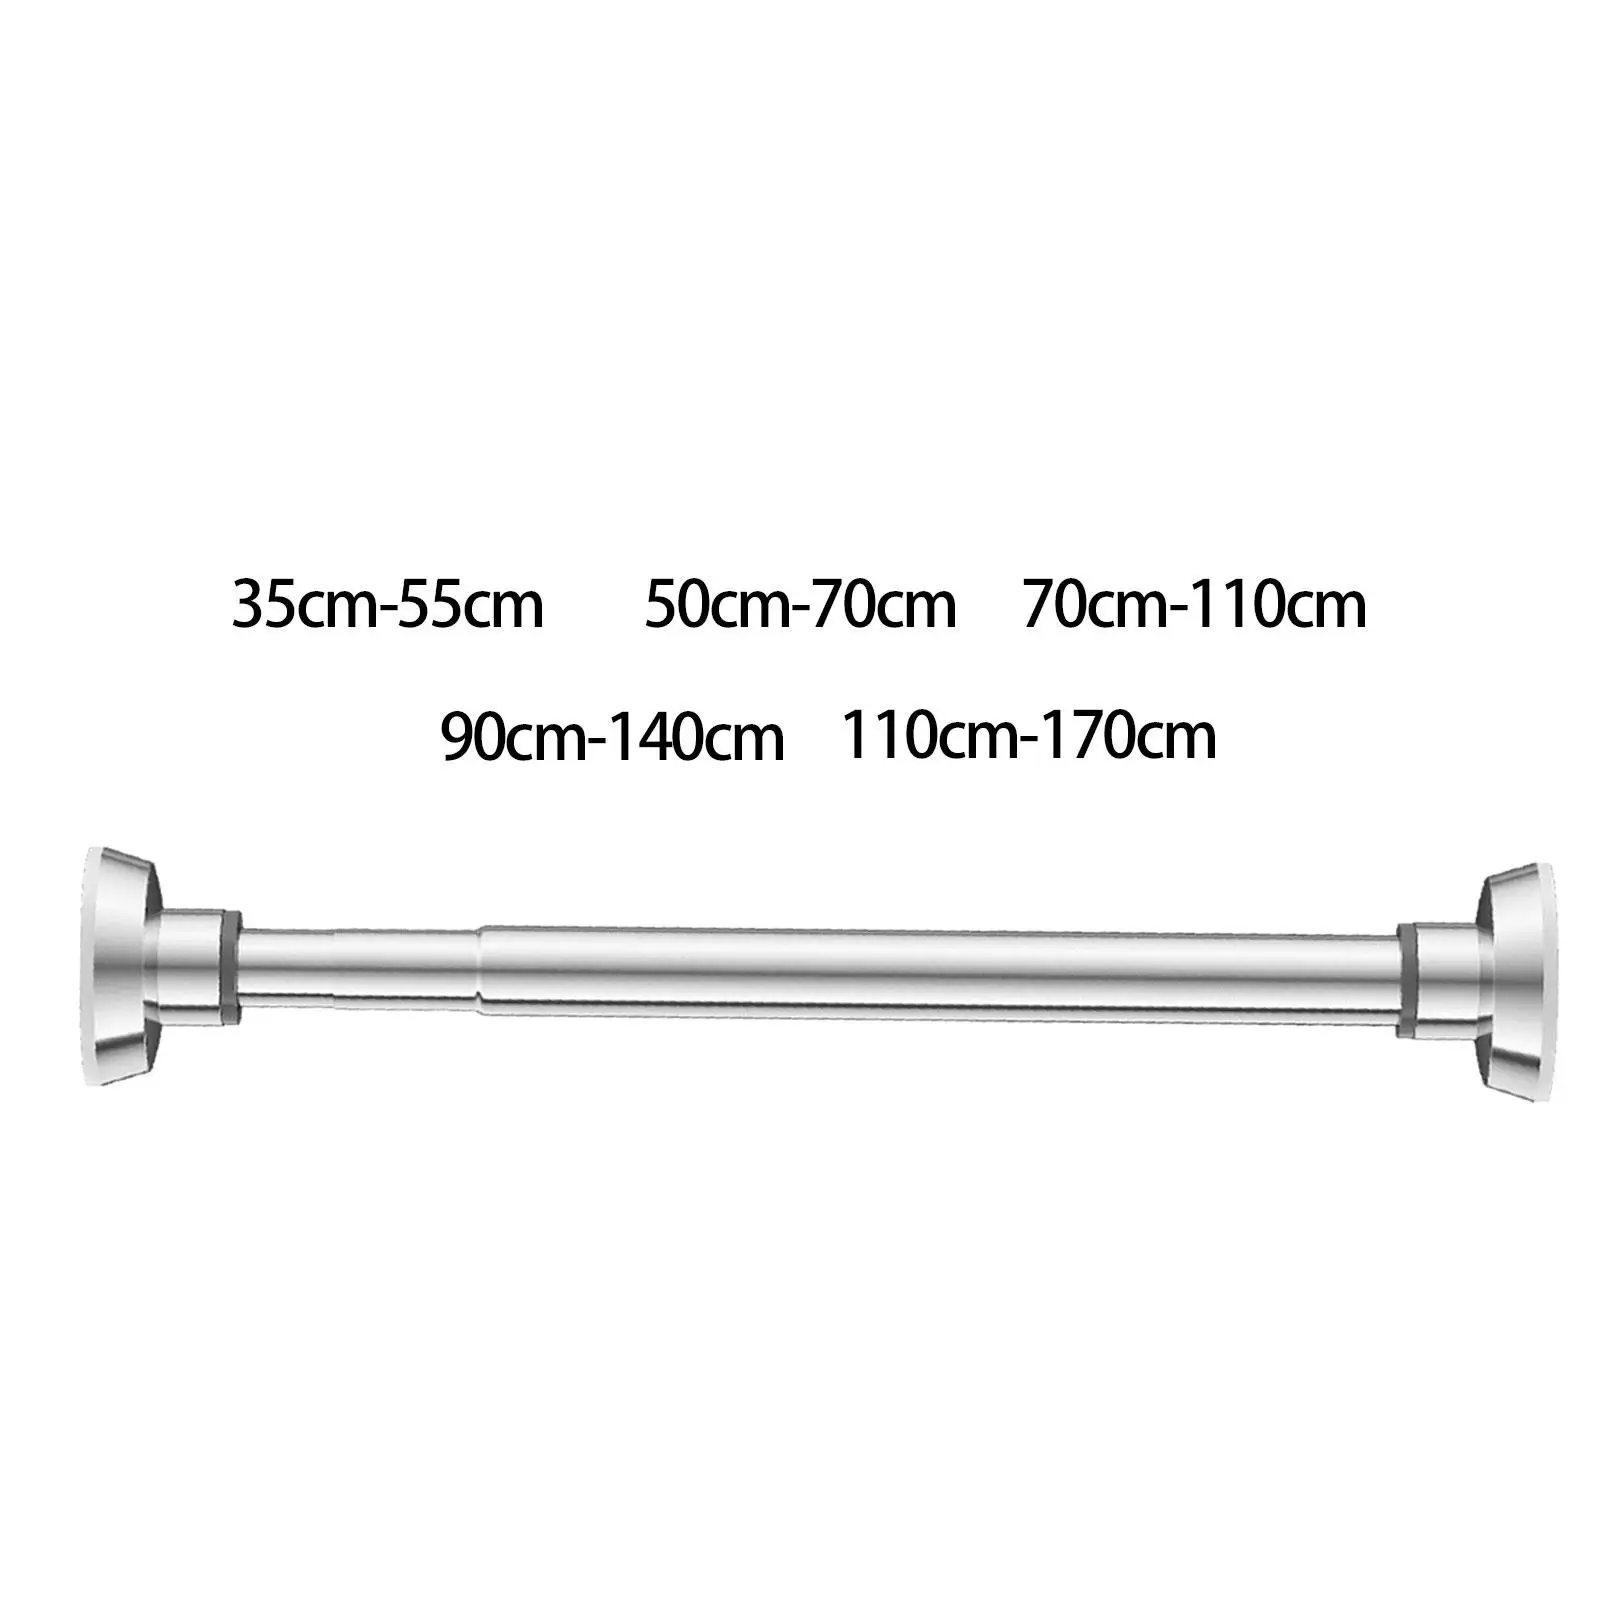 Clothes Rod Adjustable Length Curtain Rod Wall Mounted Clothes Hanger for Bedroom Closet Laundry Room Bathroom Wardrobe